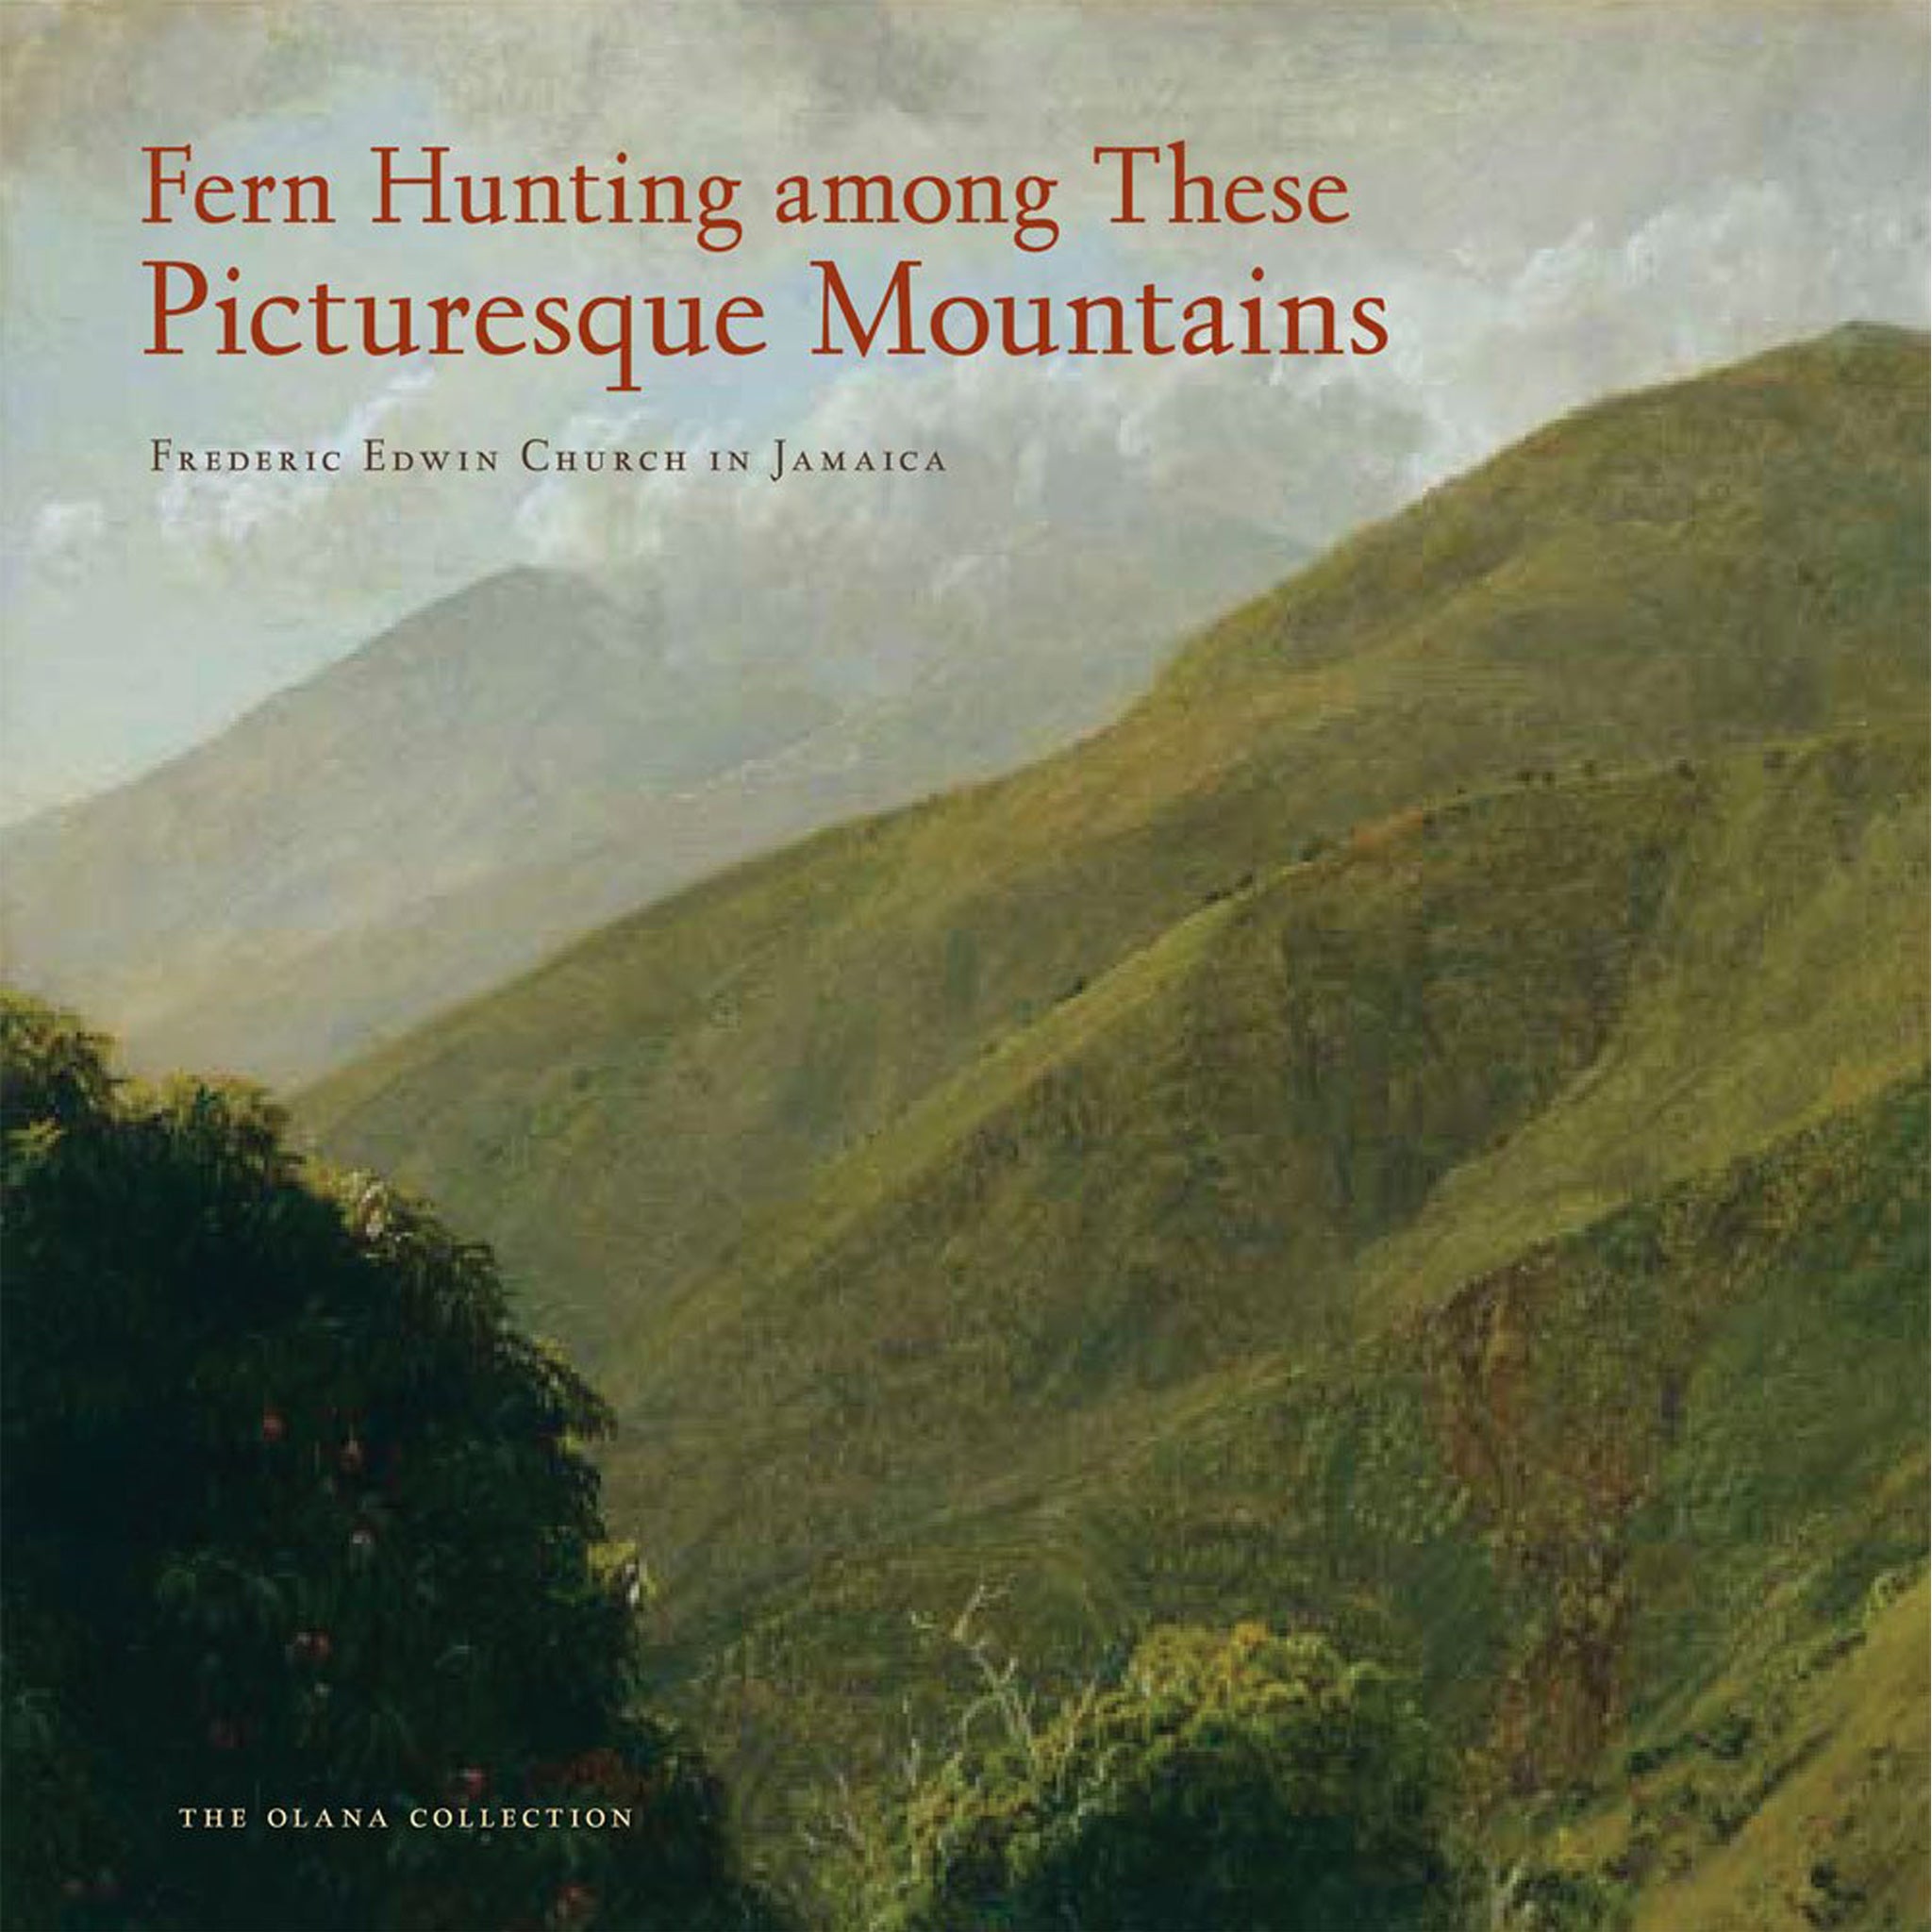 Fern Hunting among These Picturesque Mountains